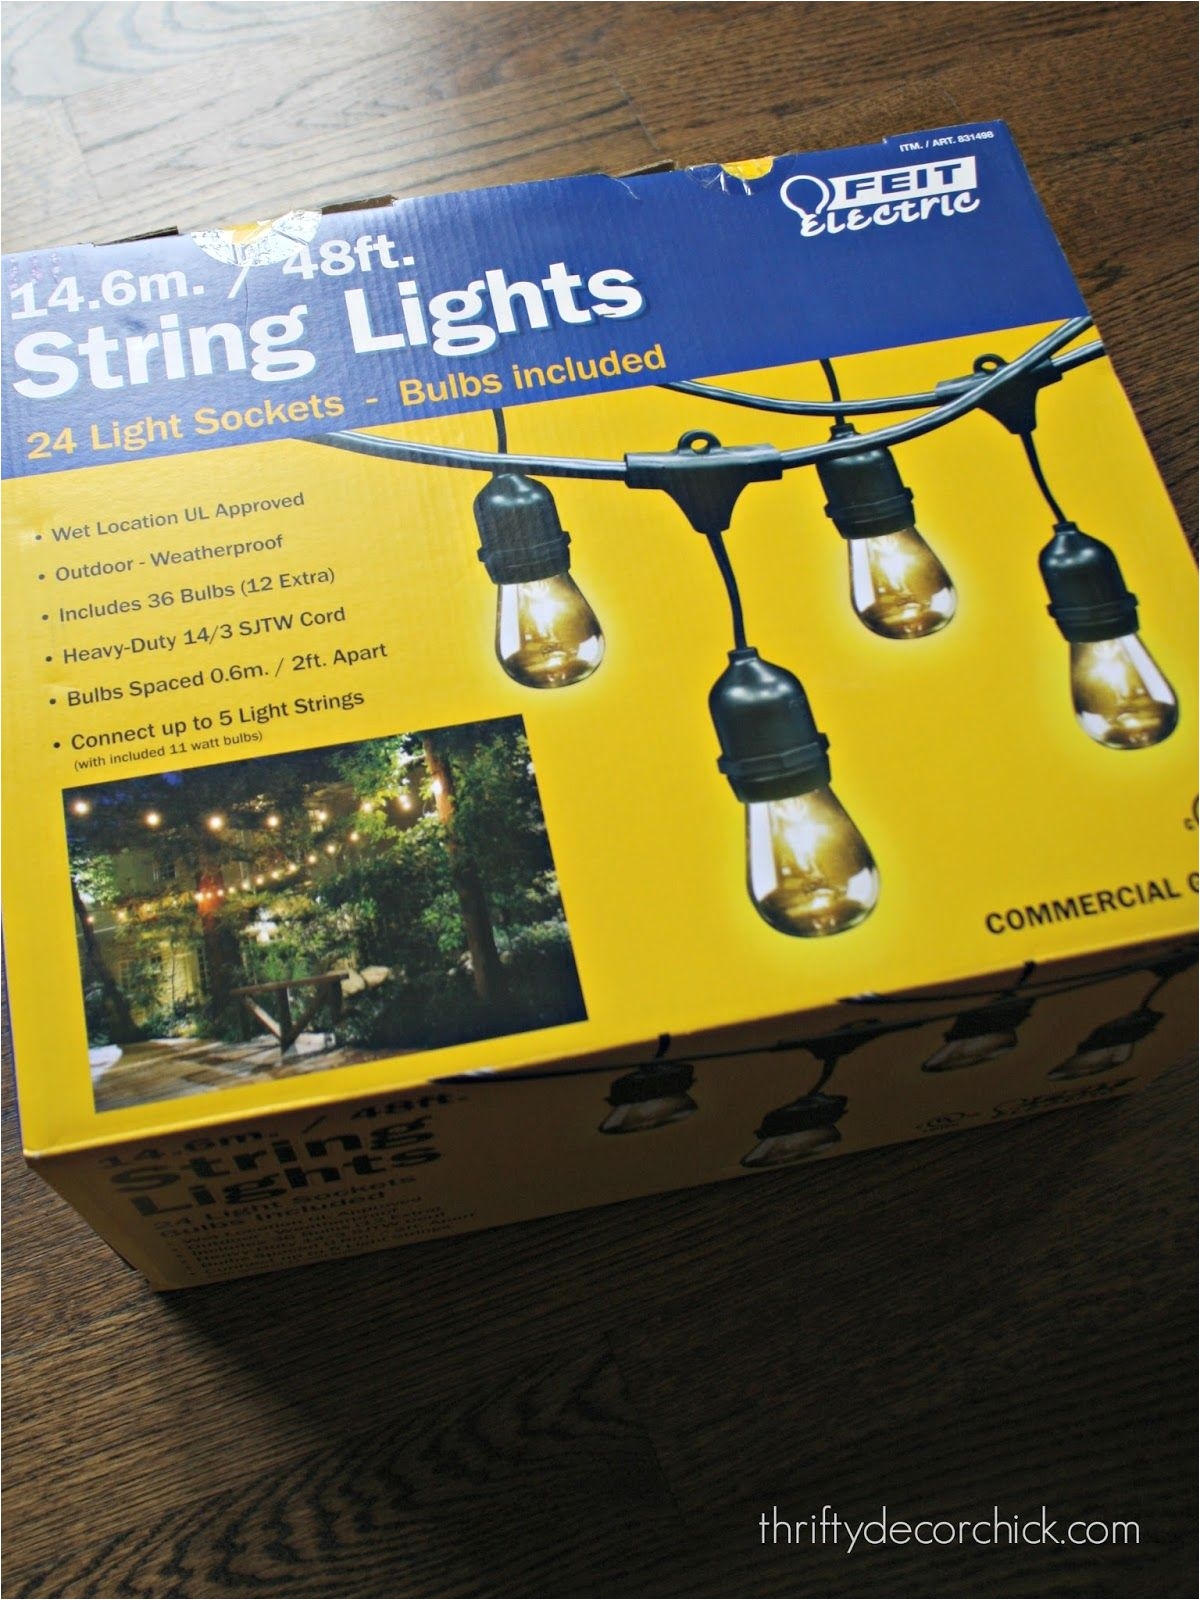 outdoor string lights with edison bulbs was 60 for 50 feet subject to change found at costco